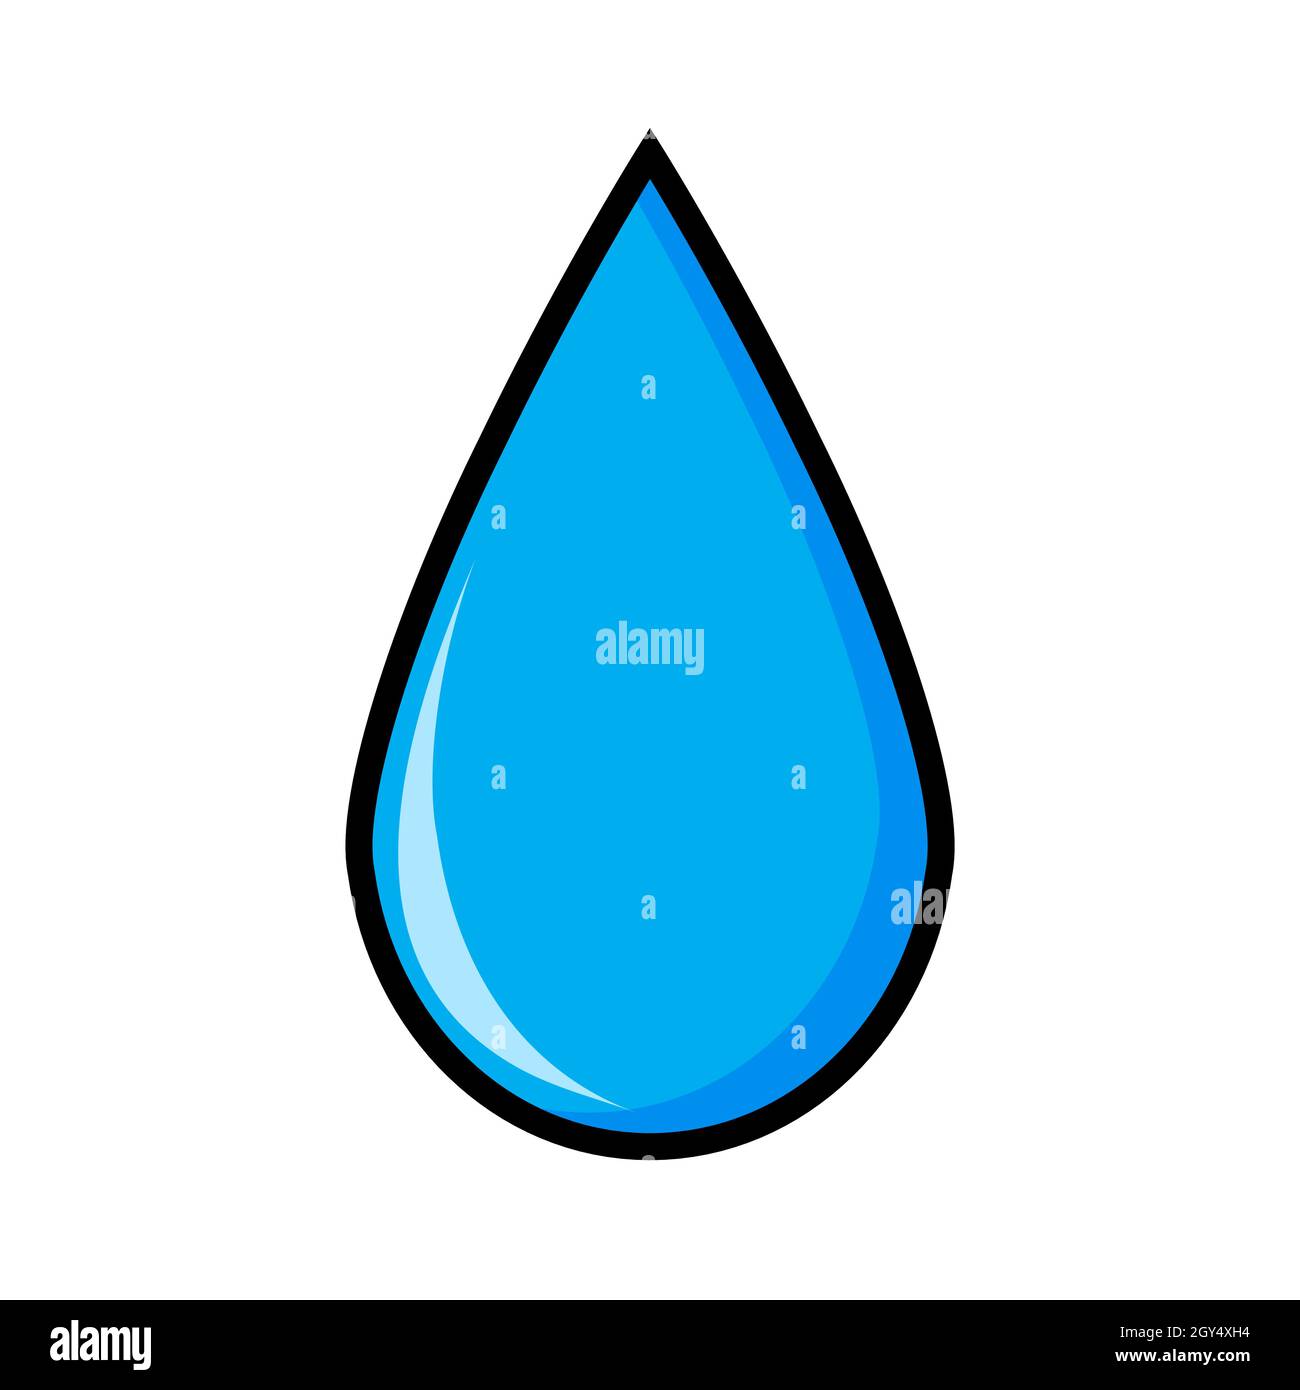 Rain drop. Water droplet icon. Simple flat blue aqua. Vector illustration isolated on white background. Stock Vector